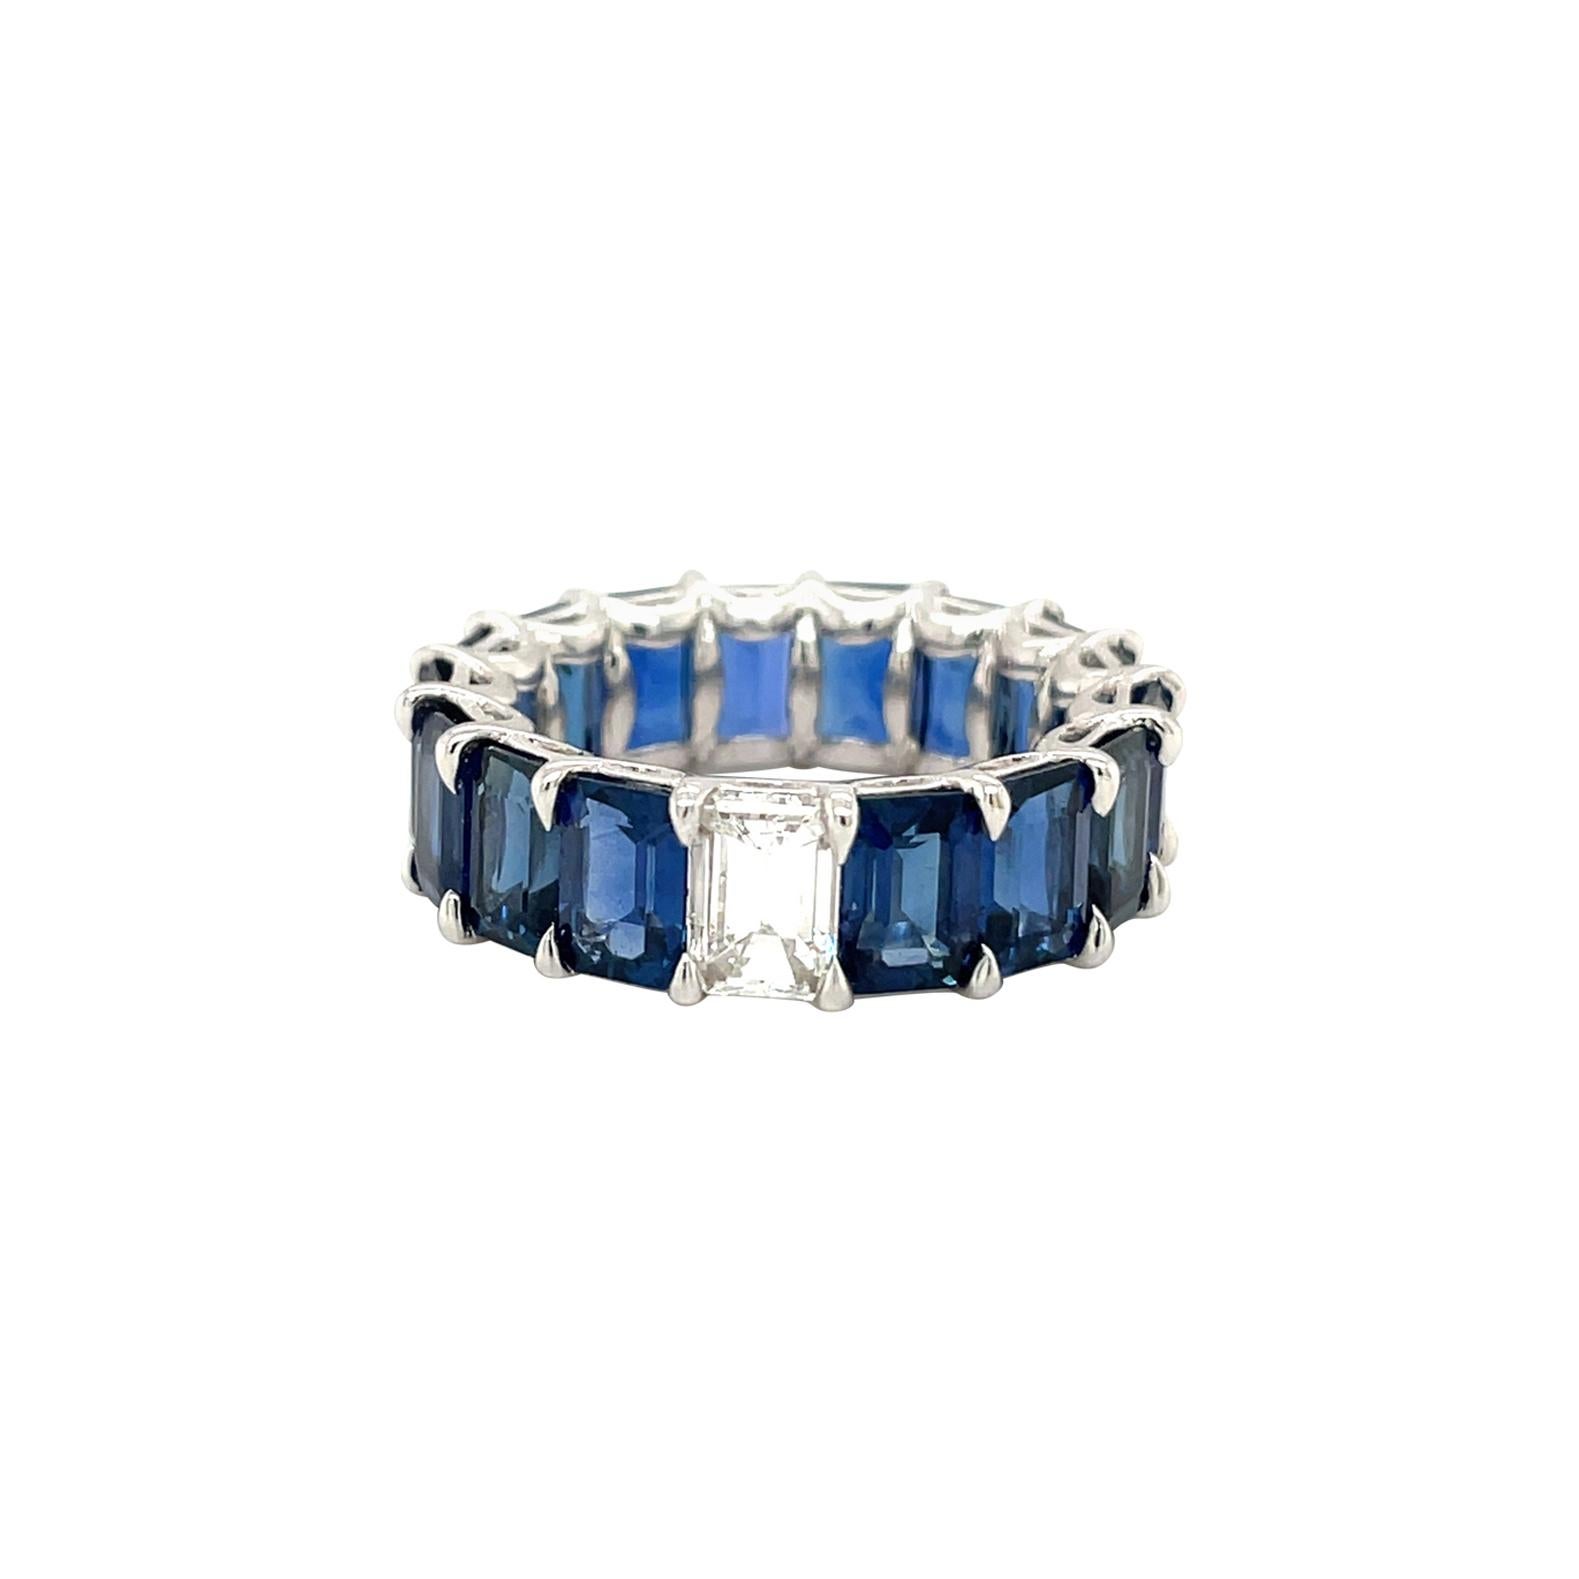 Cellini 18KT White Gold 10.69Ct. Blue Sapphire & 0.72Ct. Diamond Eternity Band For Sale